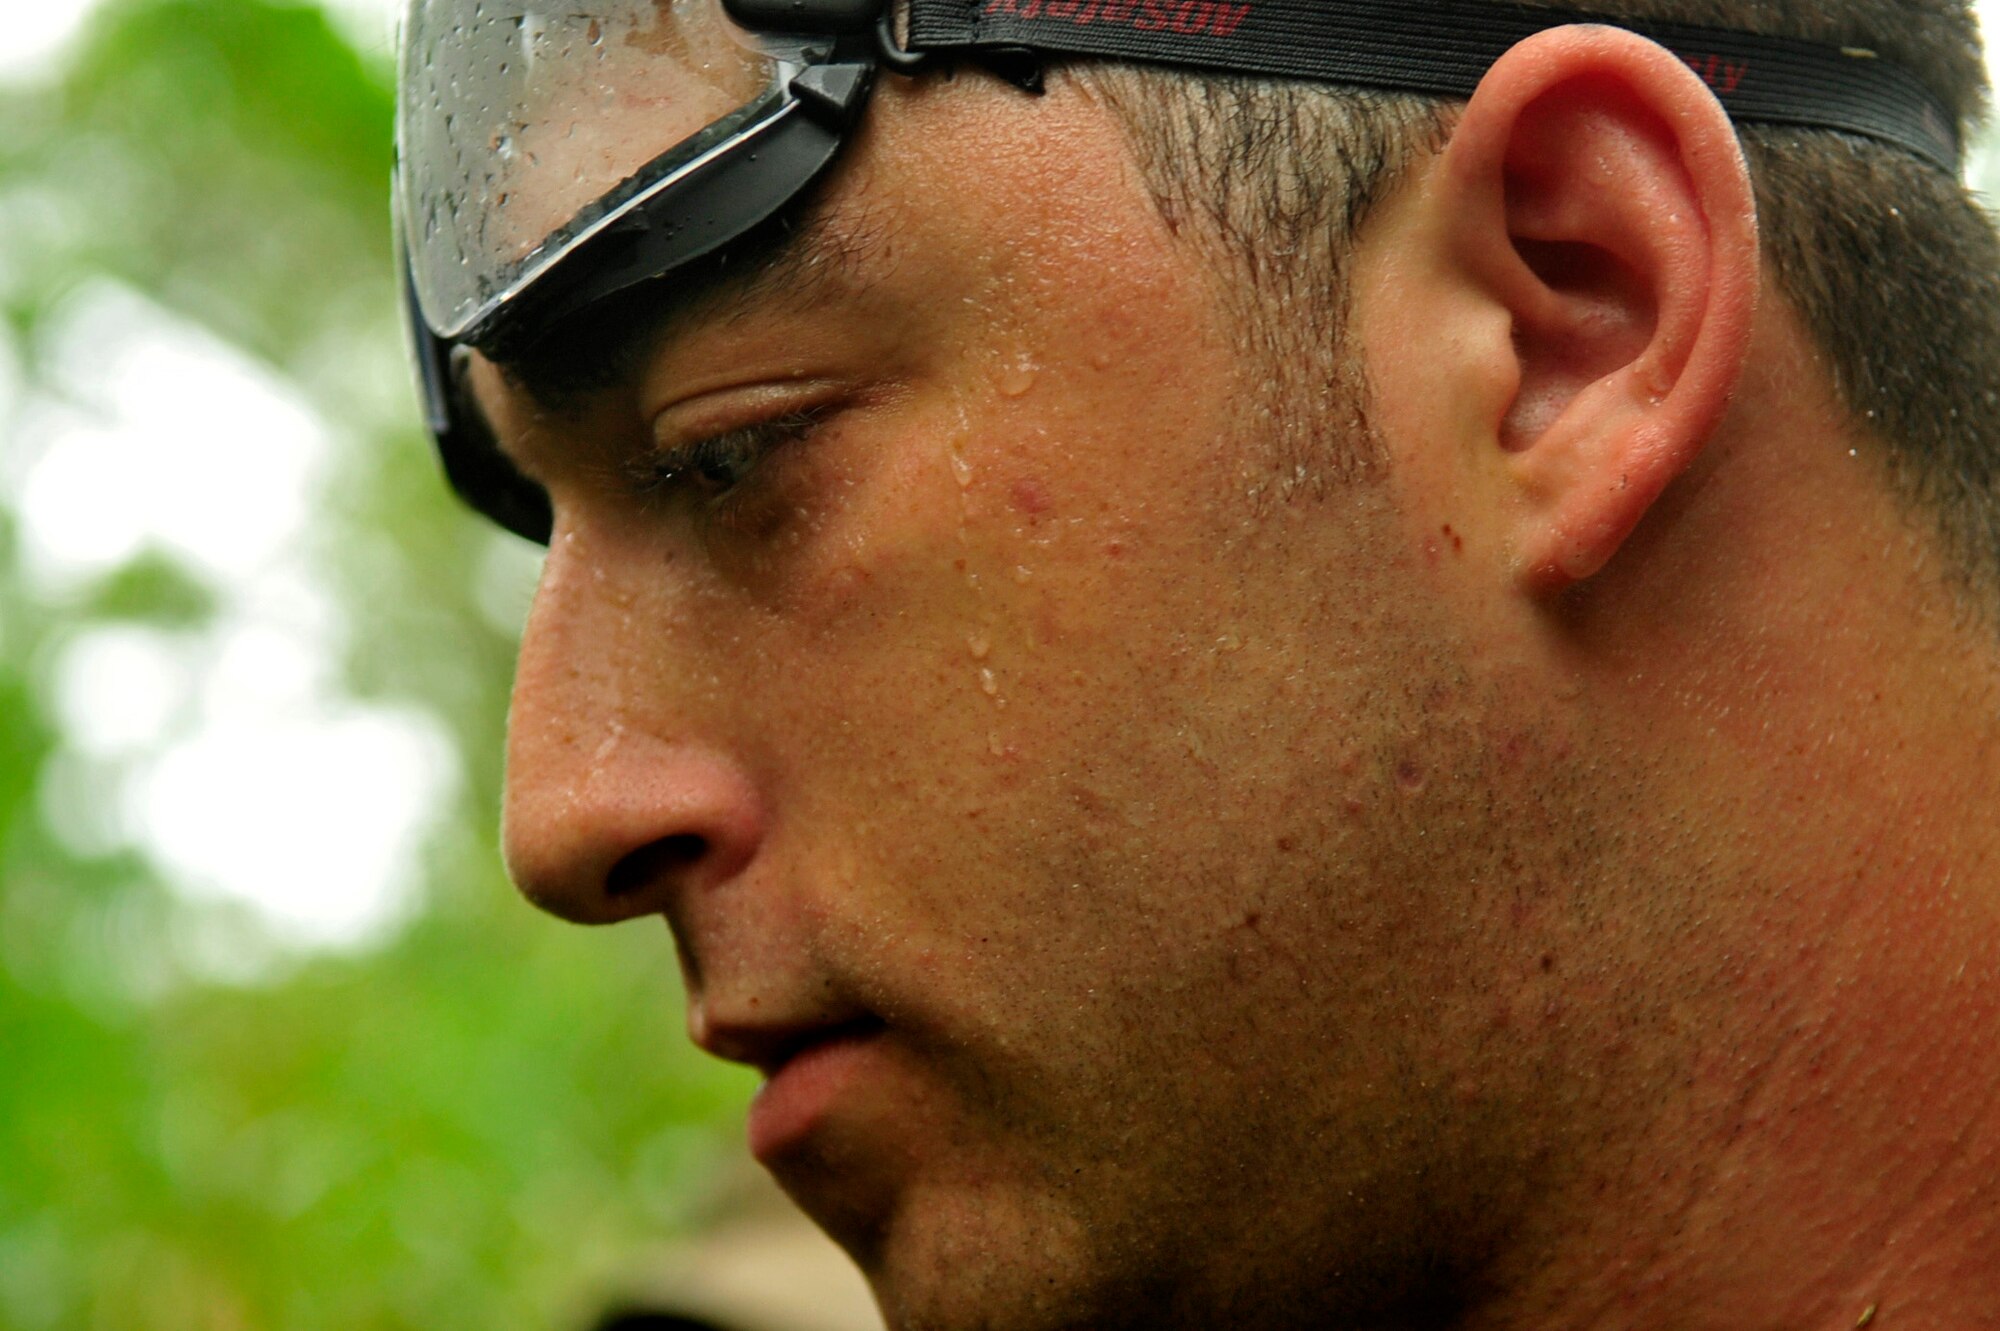 Airman 1st Class Michael Mendes, member of the 17th Special Operations Squadron, finds the coordinates on a global positioning system to pinpoint the correct direction to travel during an exercise at Kadena Air Base’s Area 1 July 1. Every three years aircrew members must undergo a refresher course of Survival, Evasion, Resistance and Escape training. (U.S. Air Force photo by Senior Airman Amanda Grabiec)